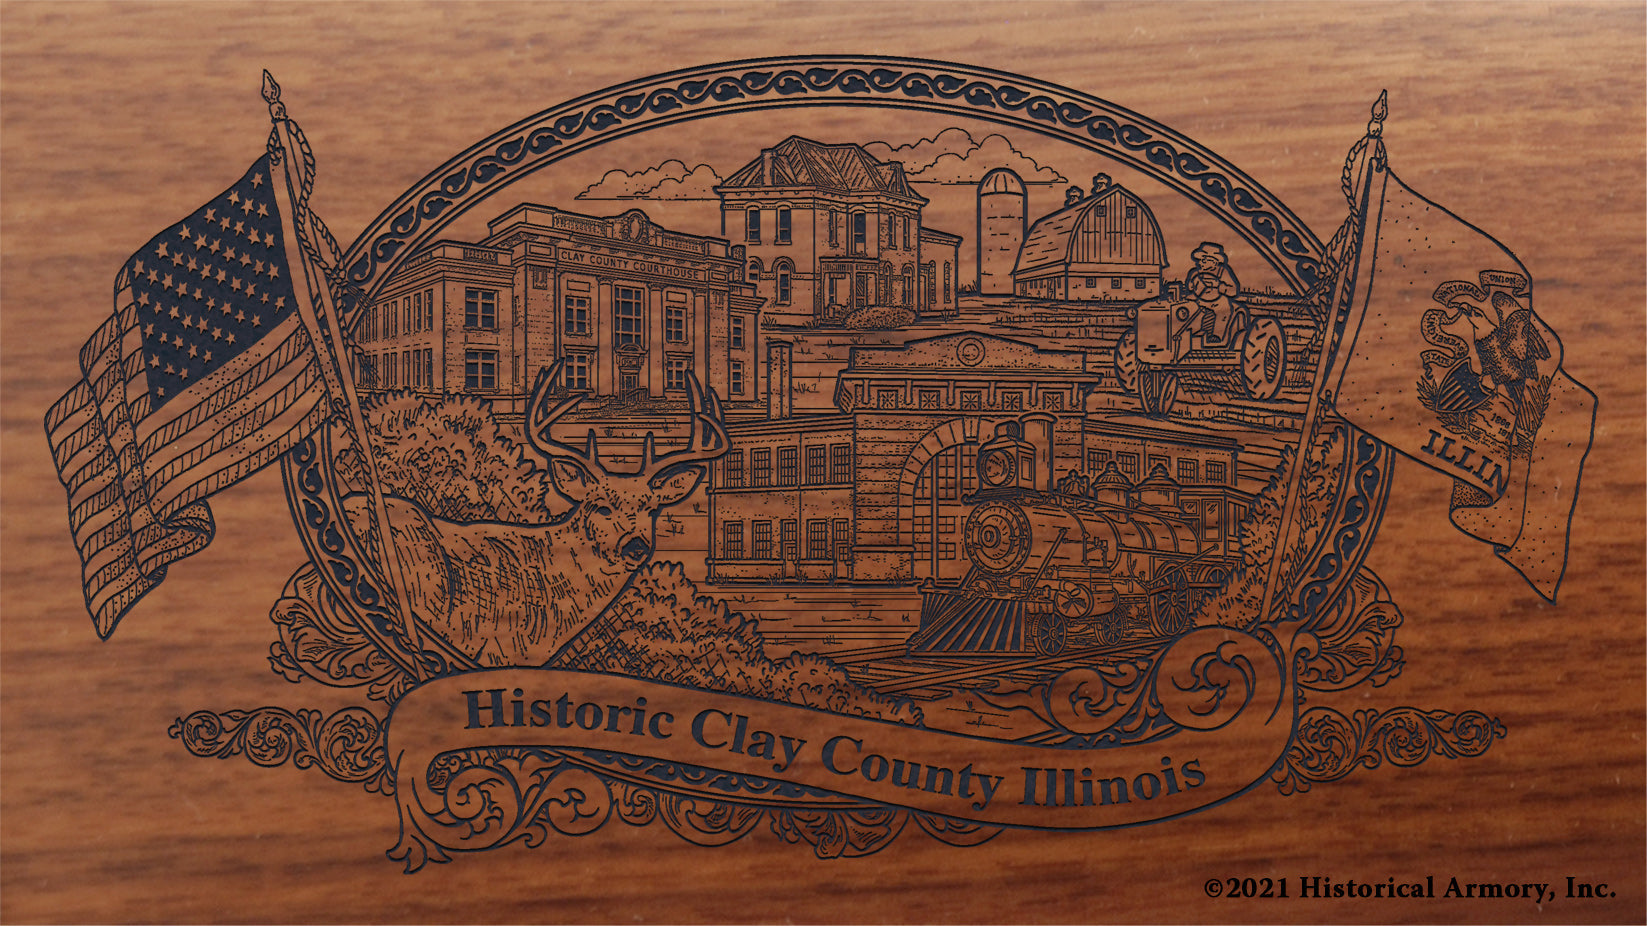 Engraved artwork | History of Clay County Illinois | Historical Armory